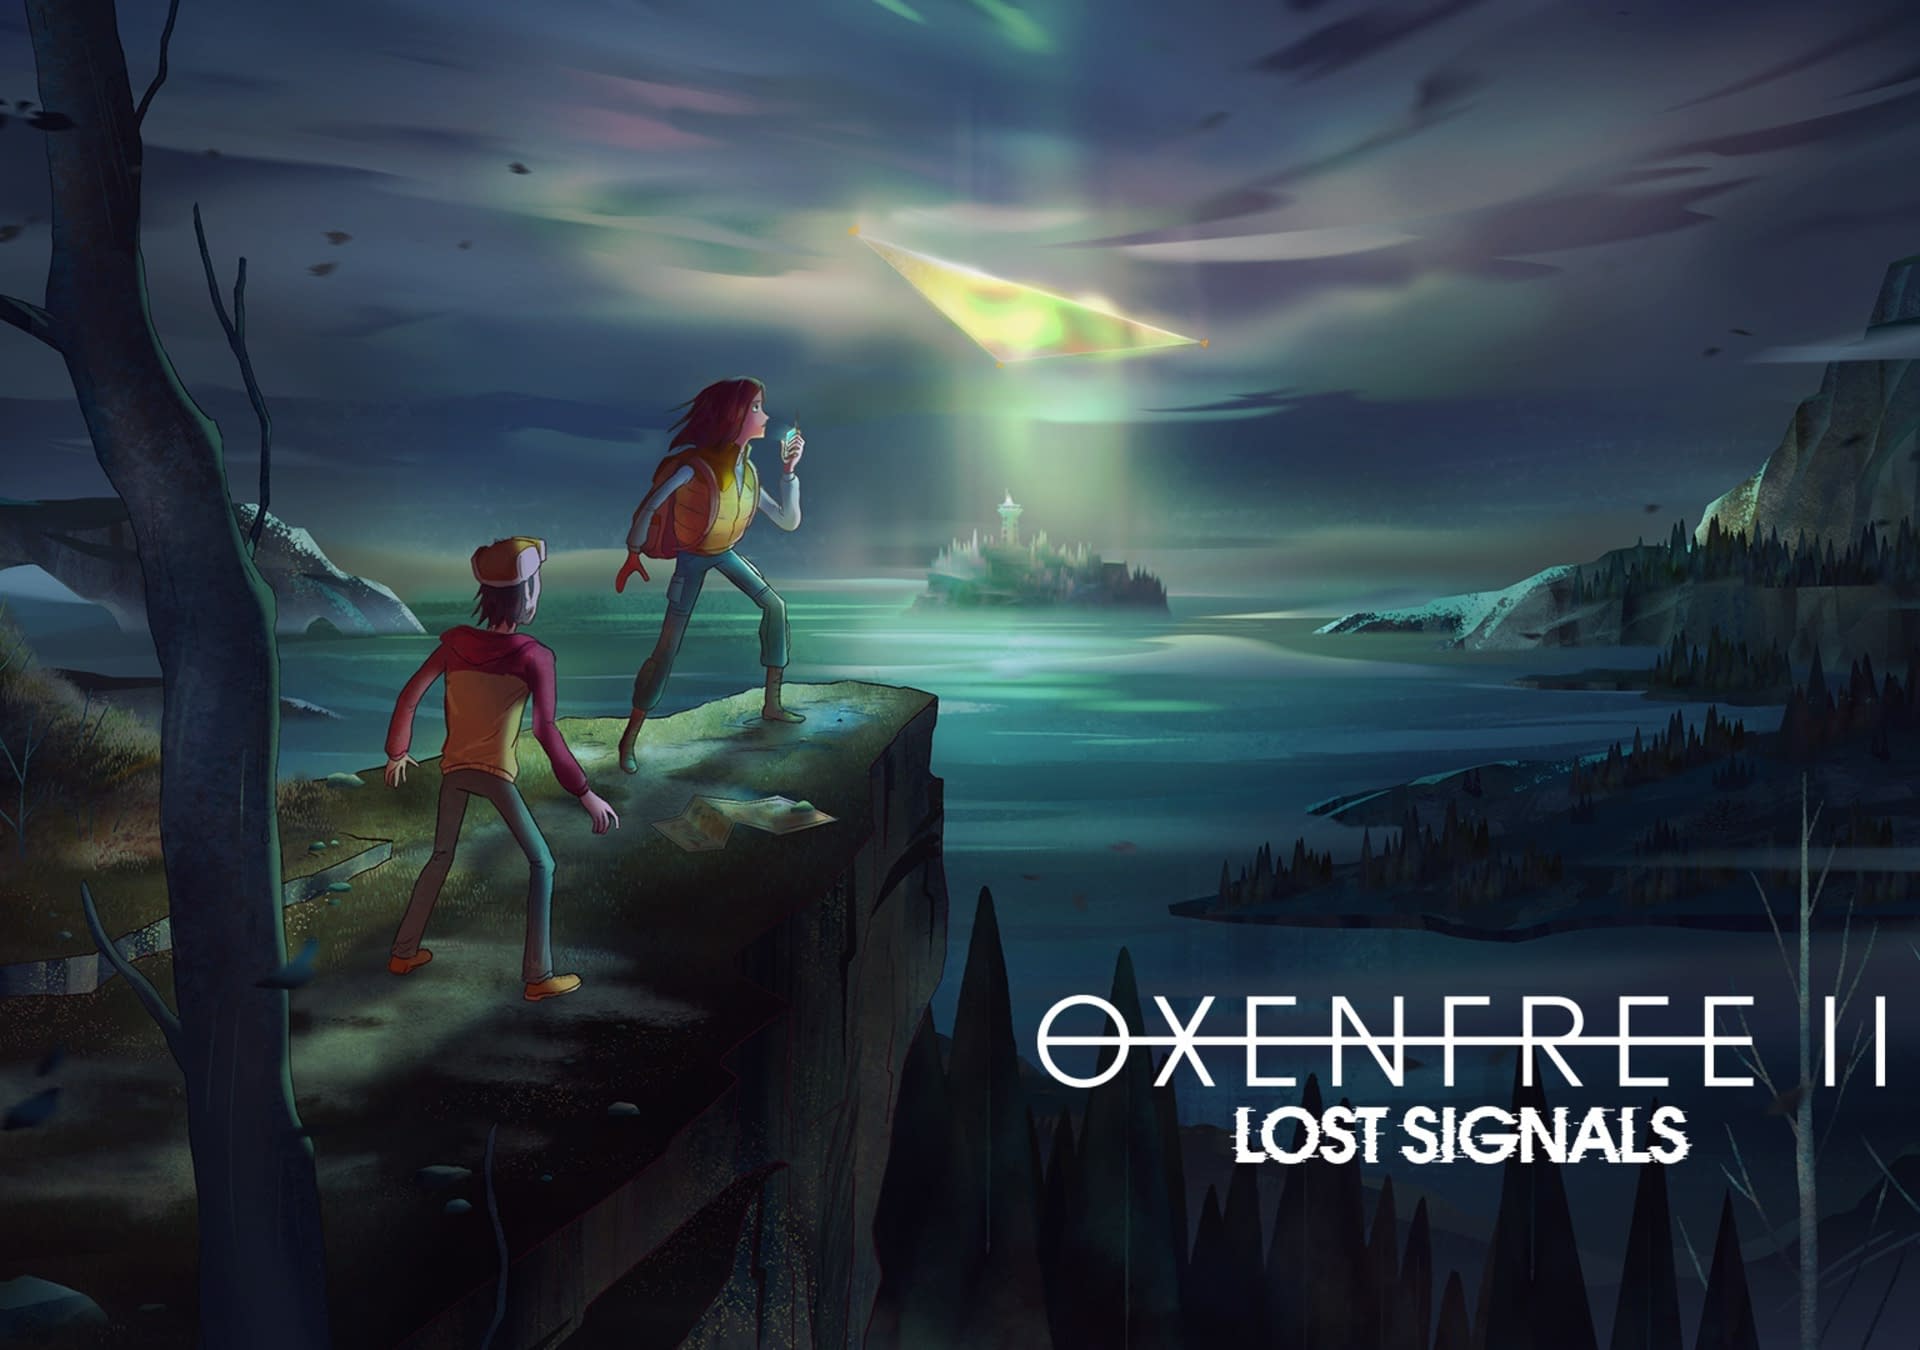 The OXENFREE II English Language Support to broadcast Netflix: Here’s All Details